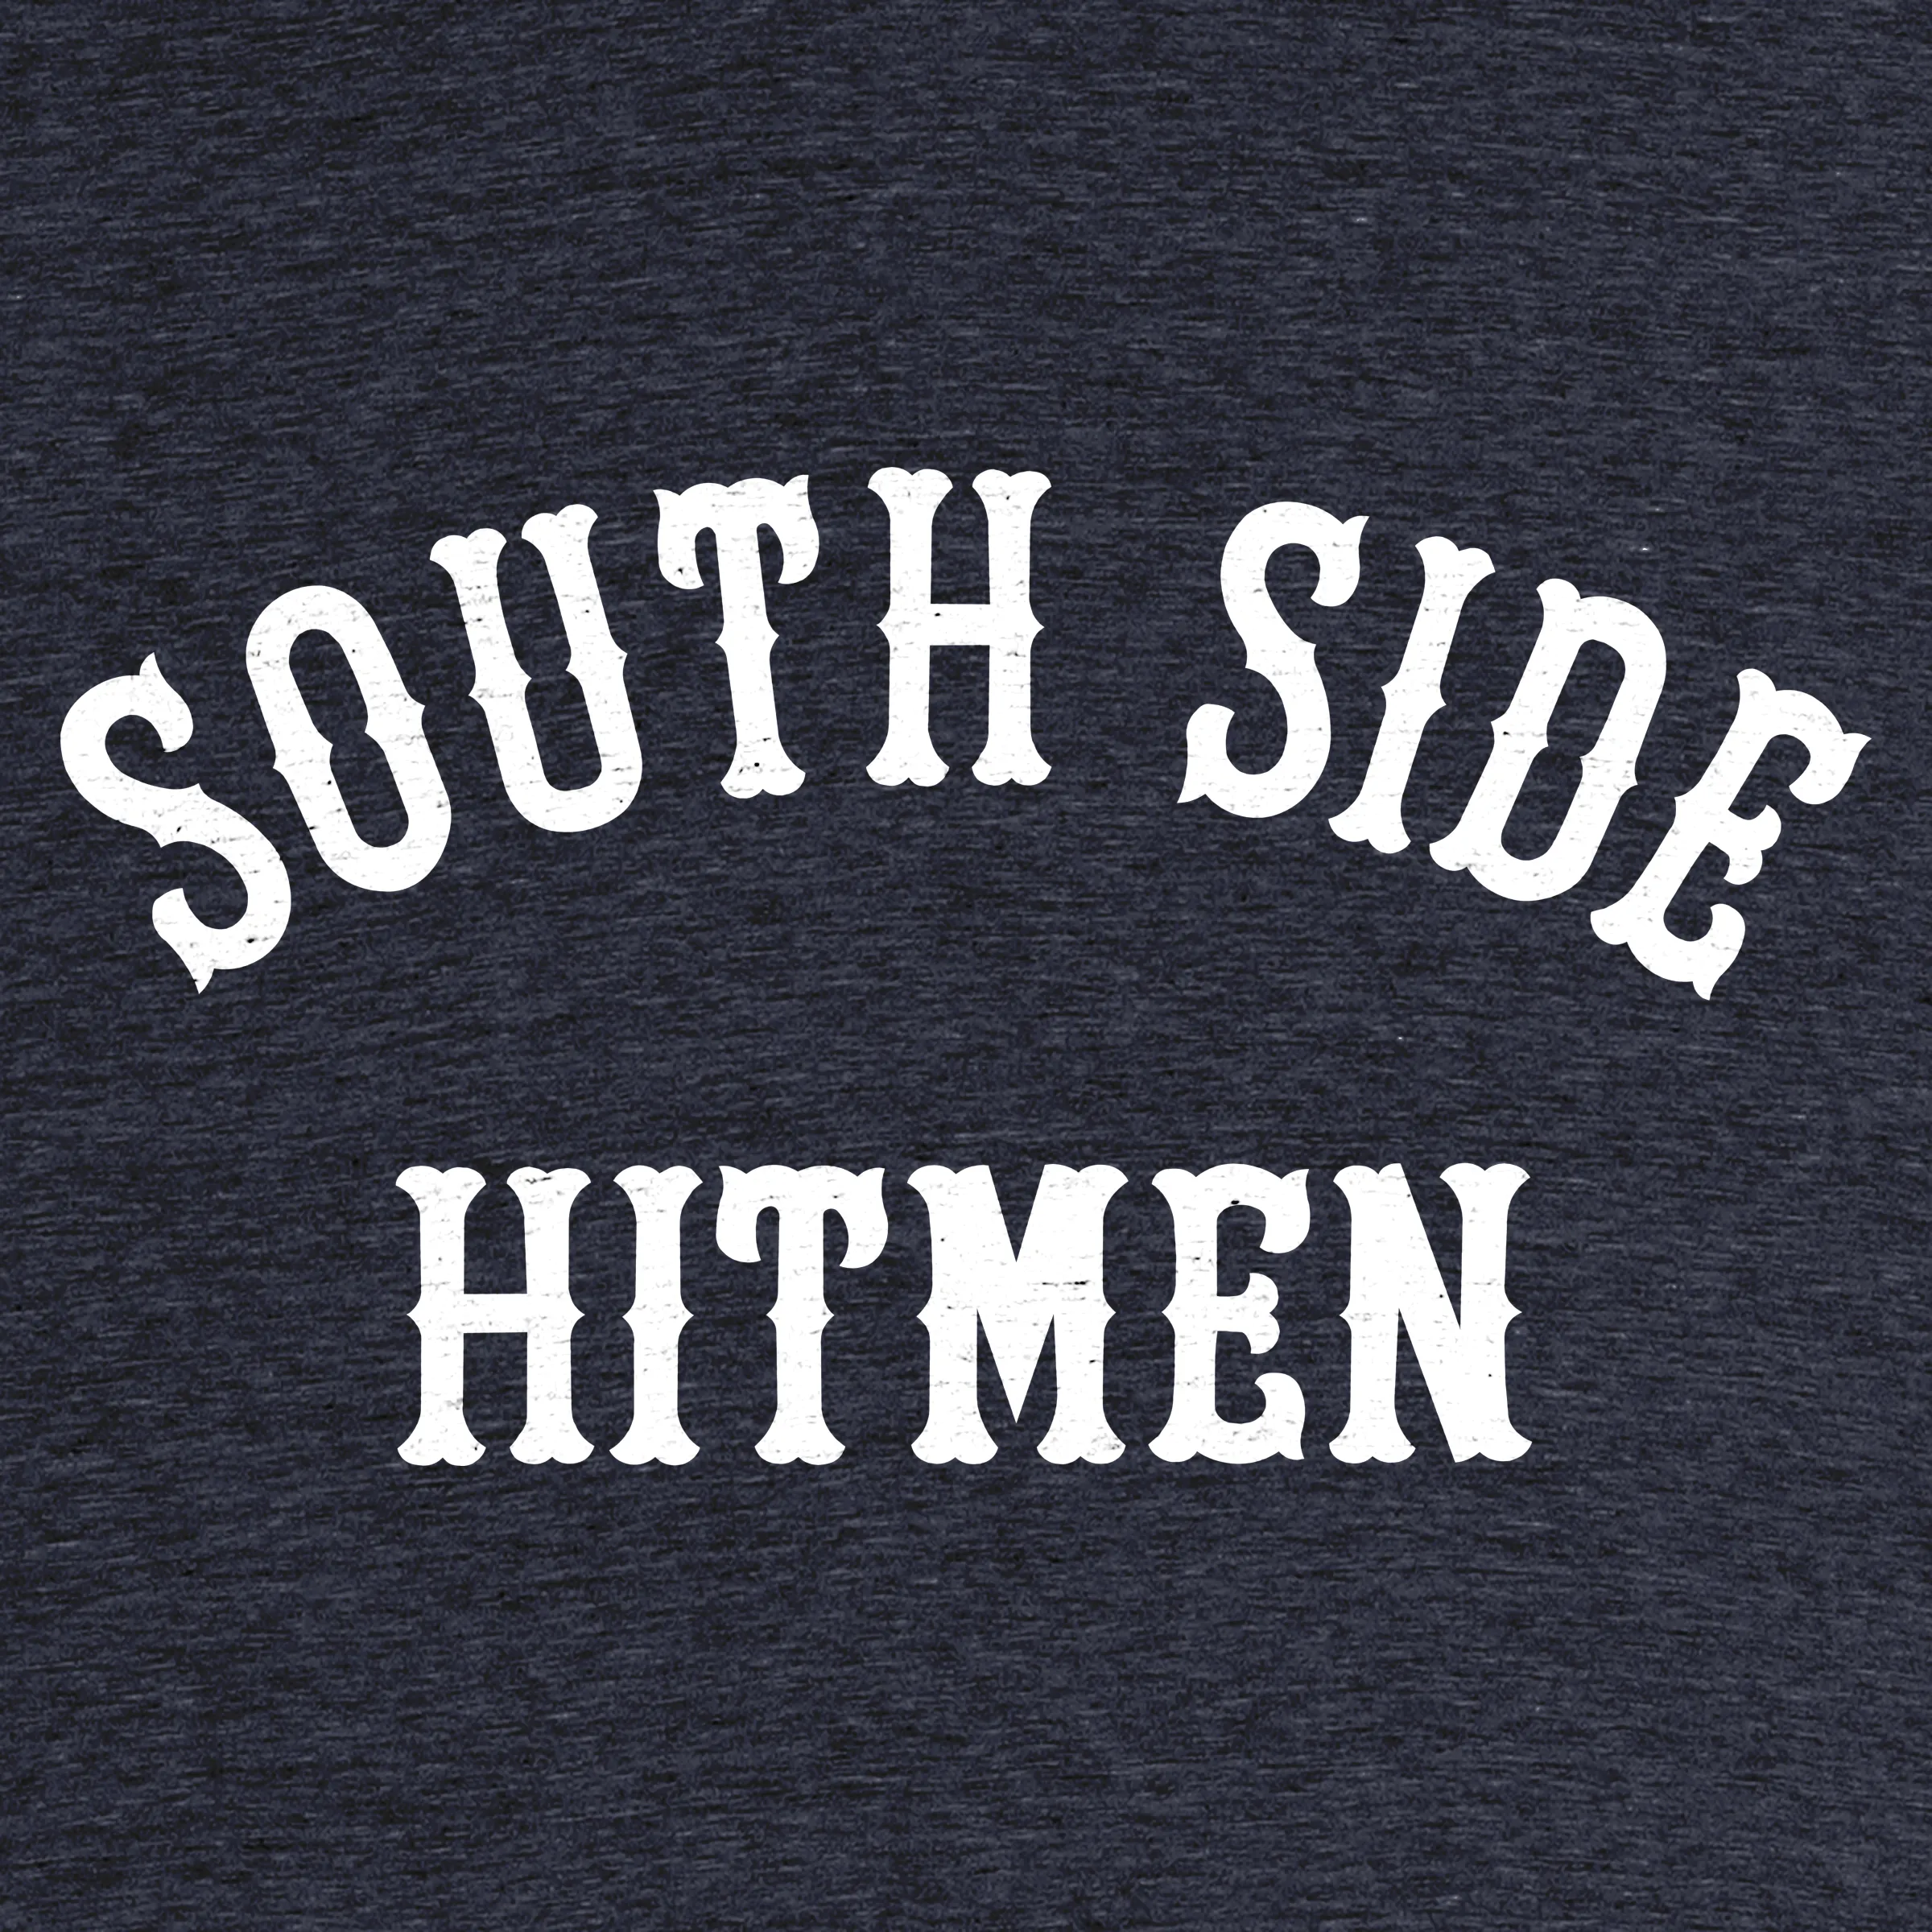 South Side Hitmen” graphic tee, pullover hoodie, tank, onesie, and pullover  crewneck by Deep Dish Tees.